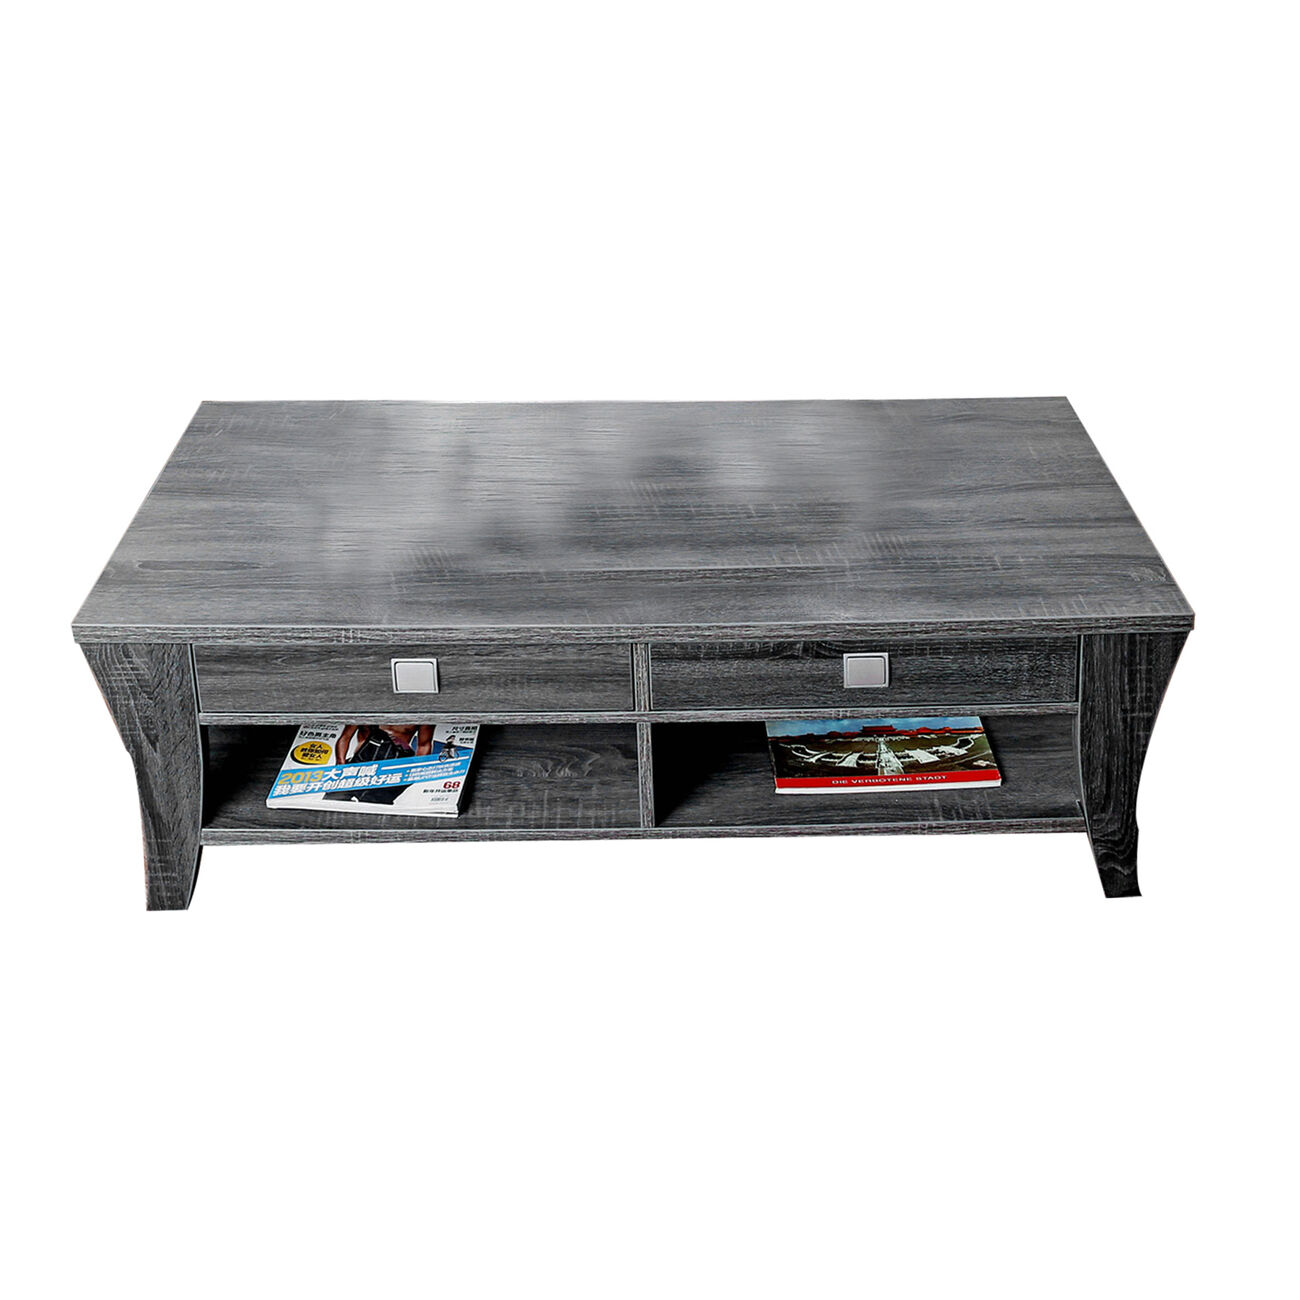 Low Rise Coffee Table with Drawers and Bottom Shelves, Gray